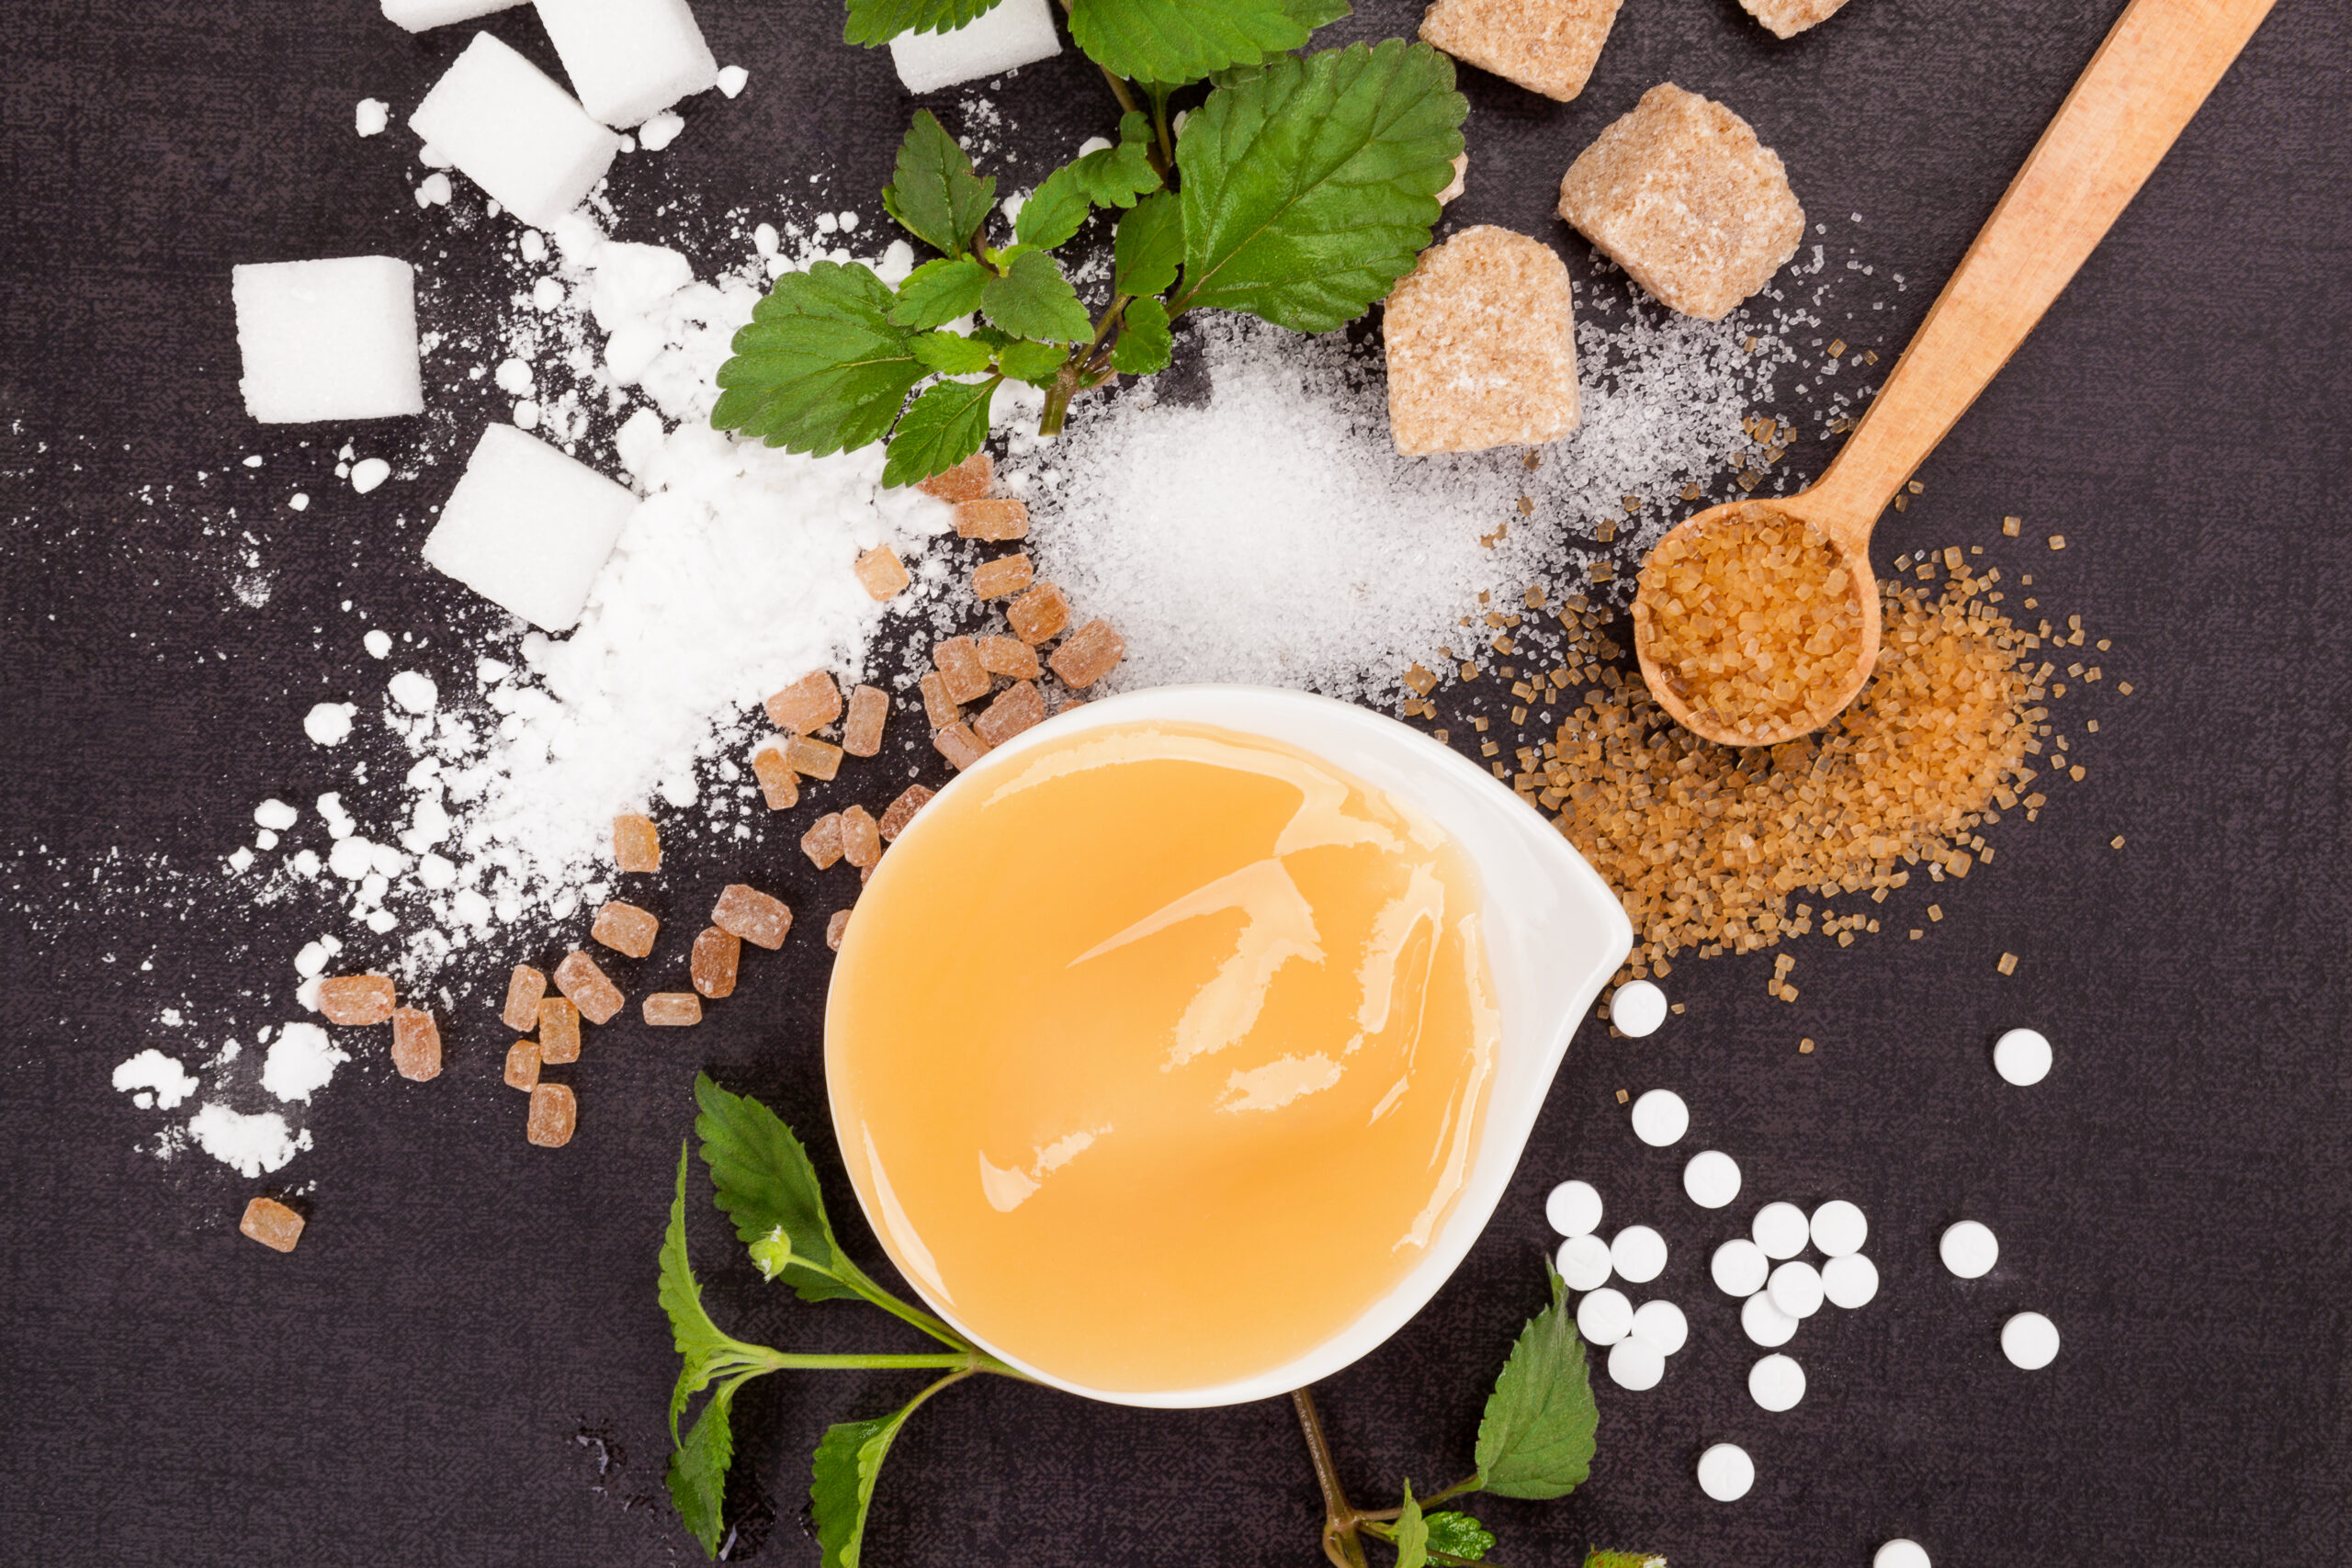 Sweeteners reformulated for American consumers